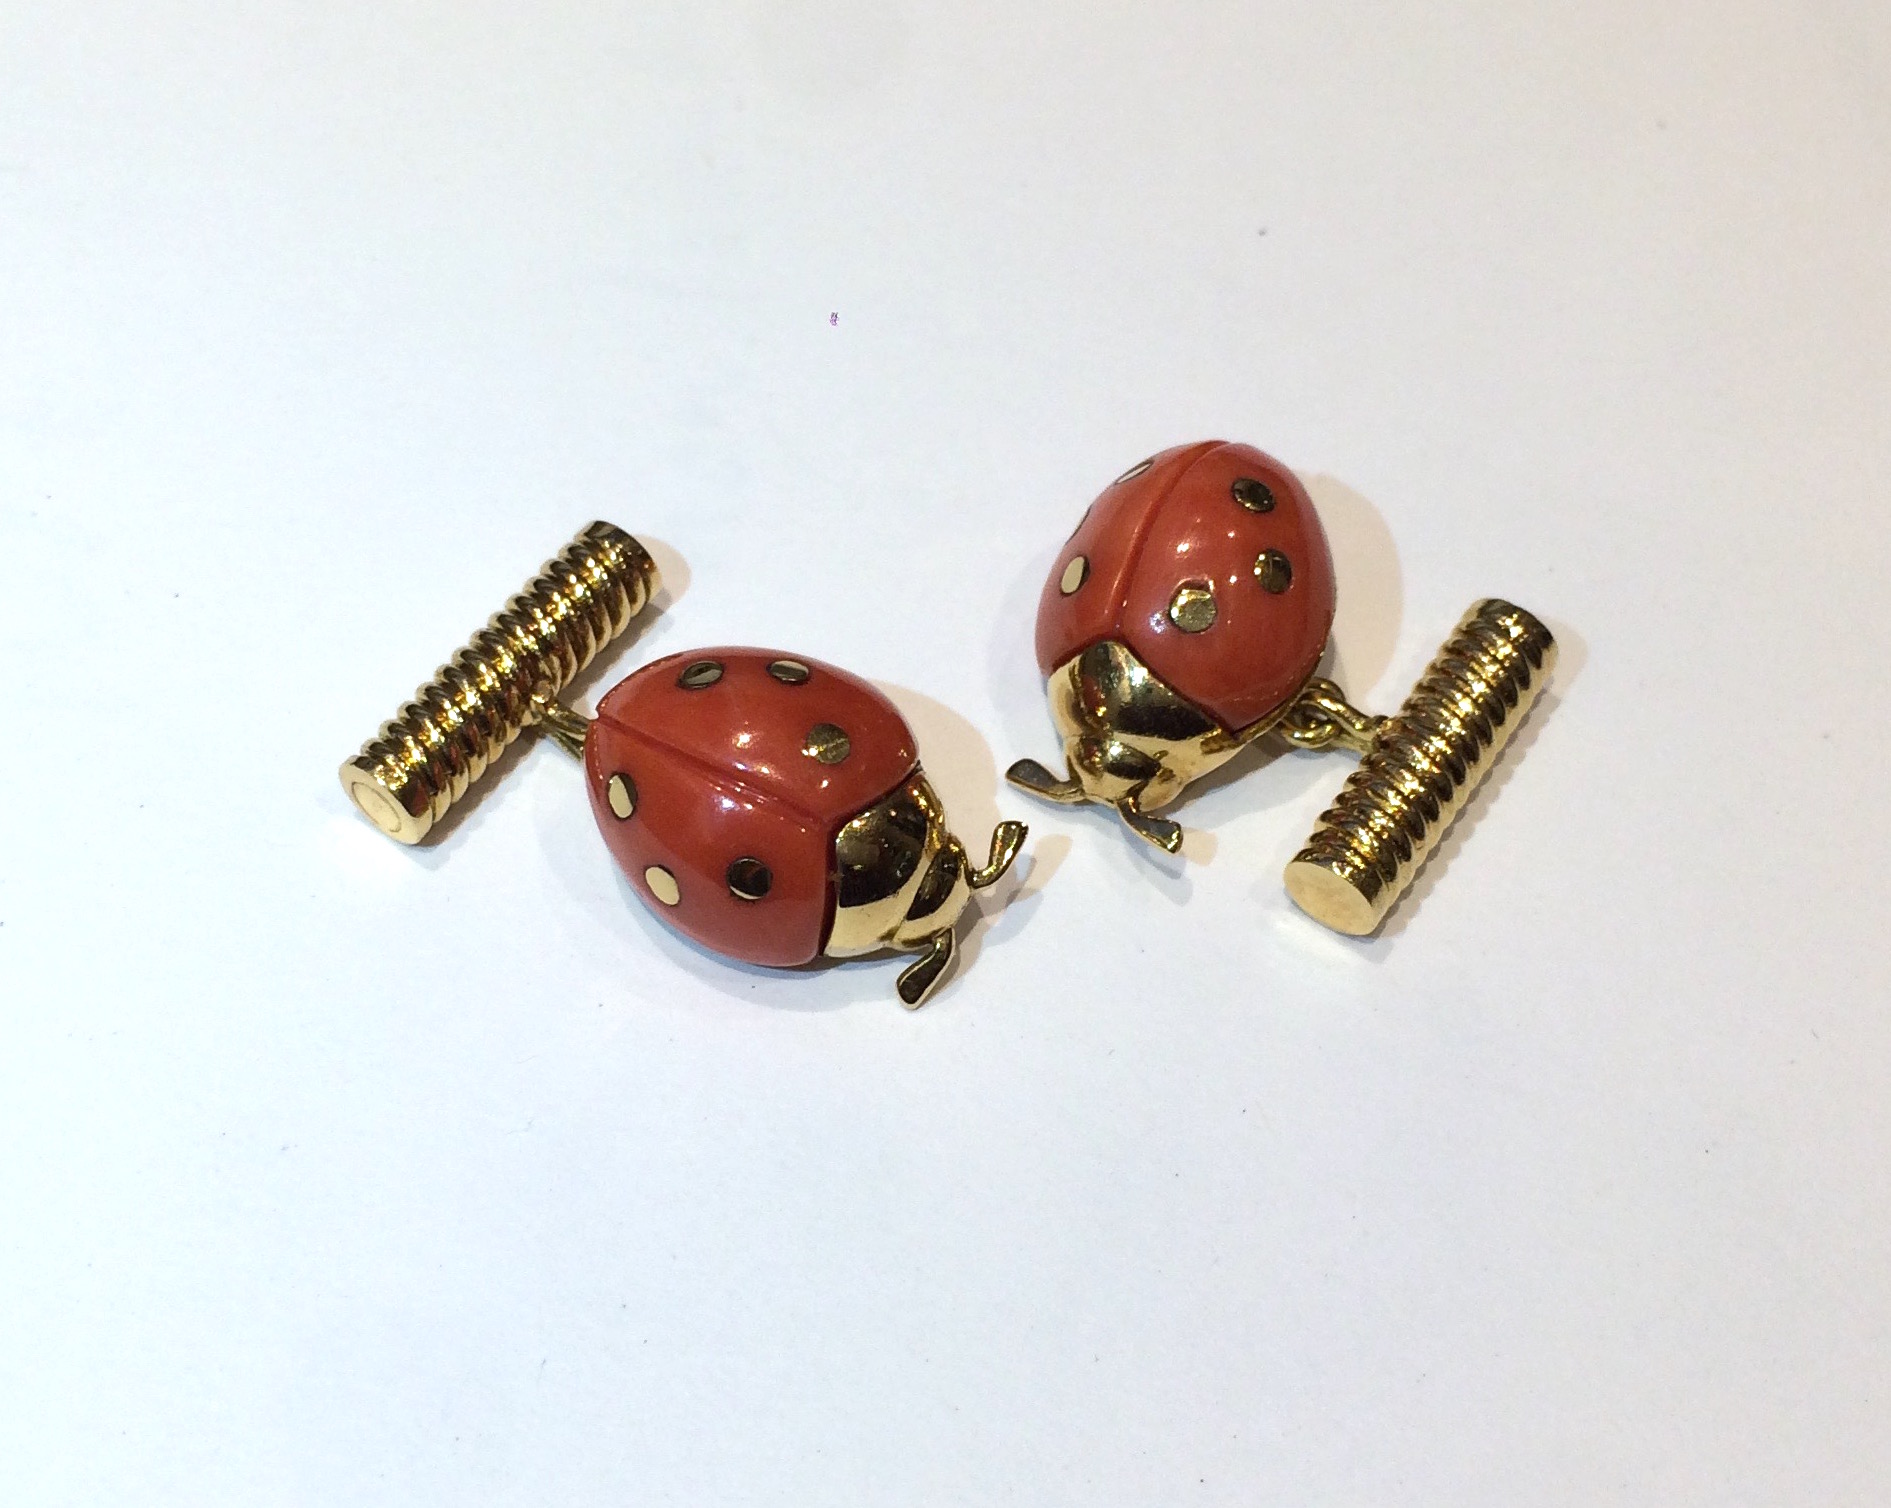 Cartier “Ladybug” cufflinks, coral and 18K gold, signed, 1950’s